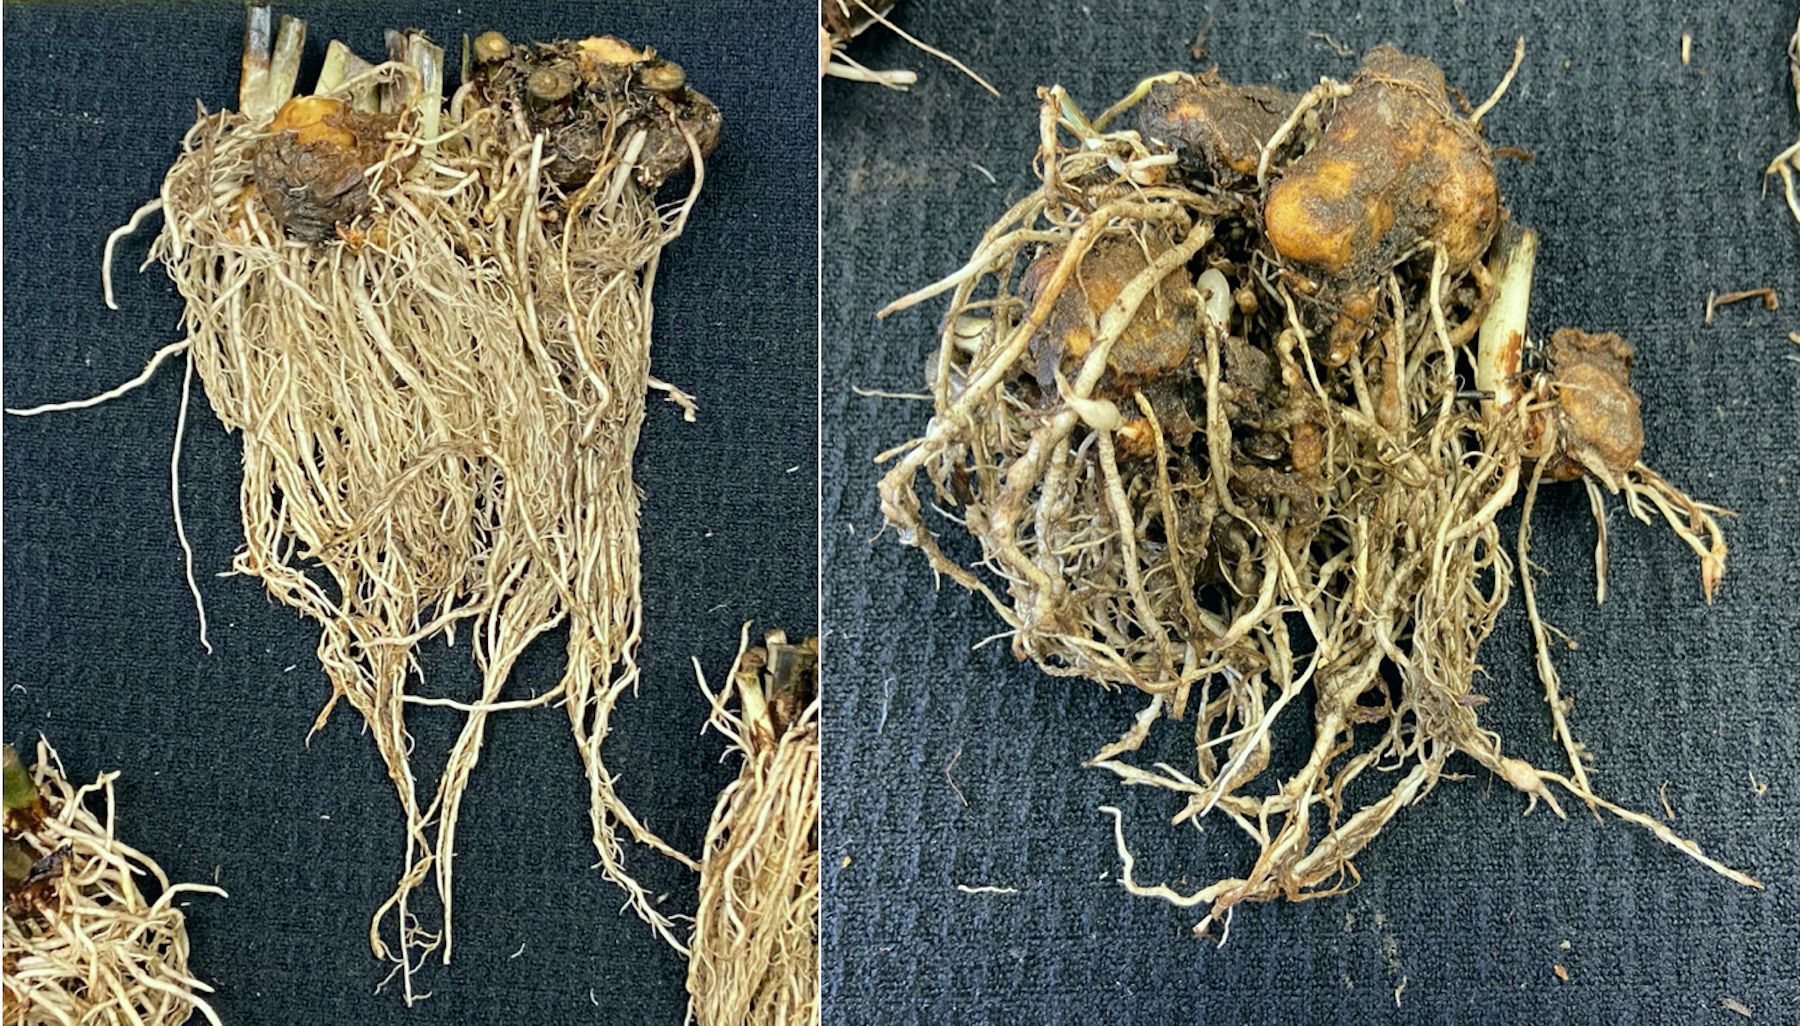 Galled root symptoms on caladium caused by root-knot nematode, UF/GCREC, July 2020. Left: healthy caladium roots; right: galled root symptom. 